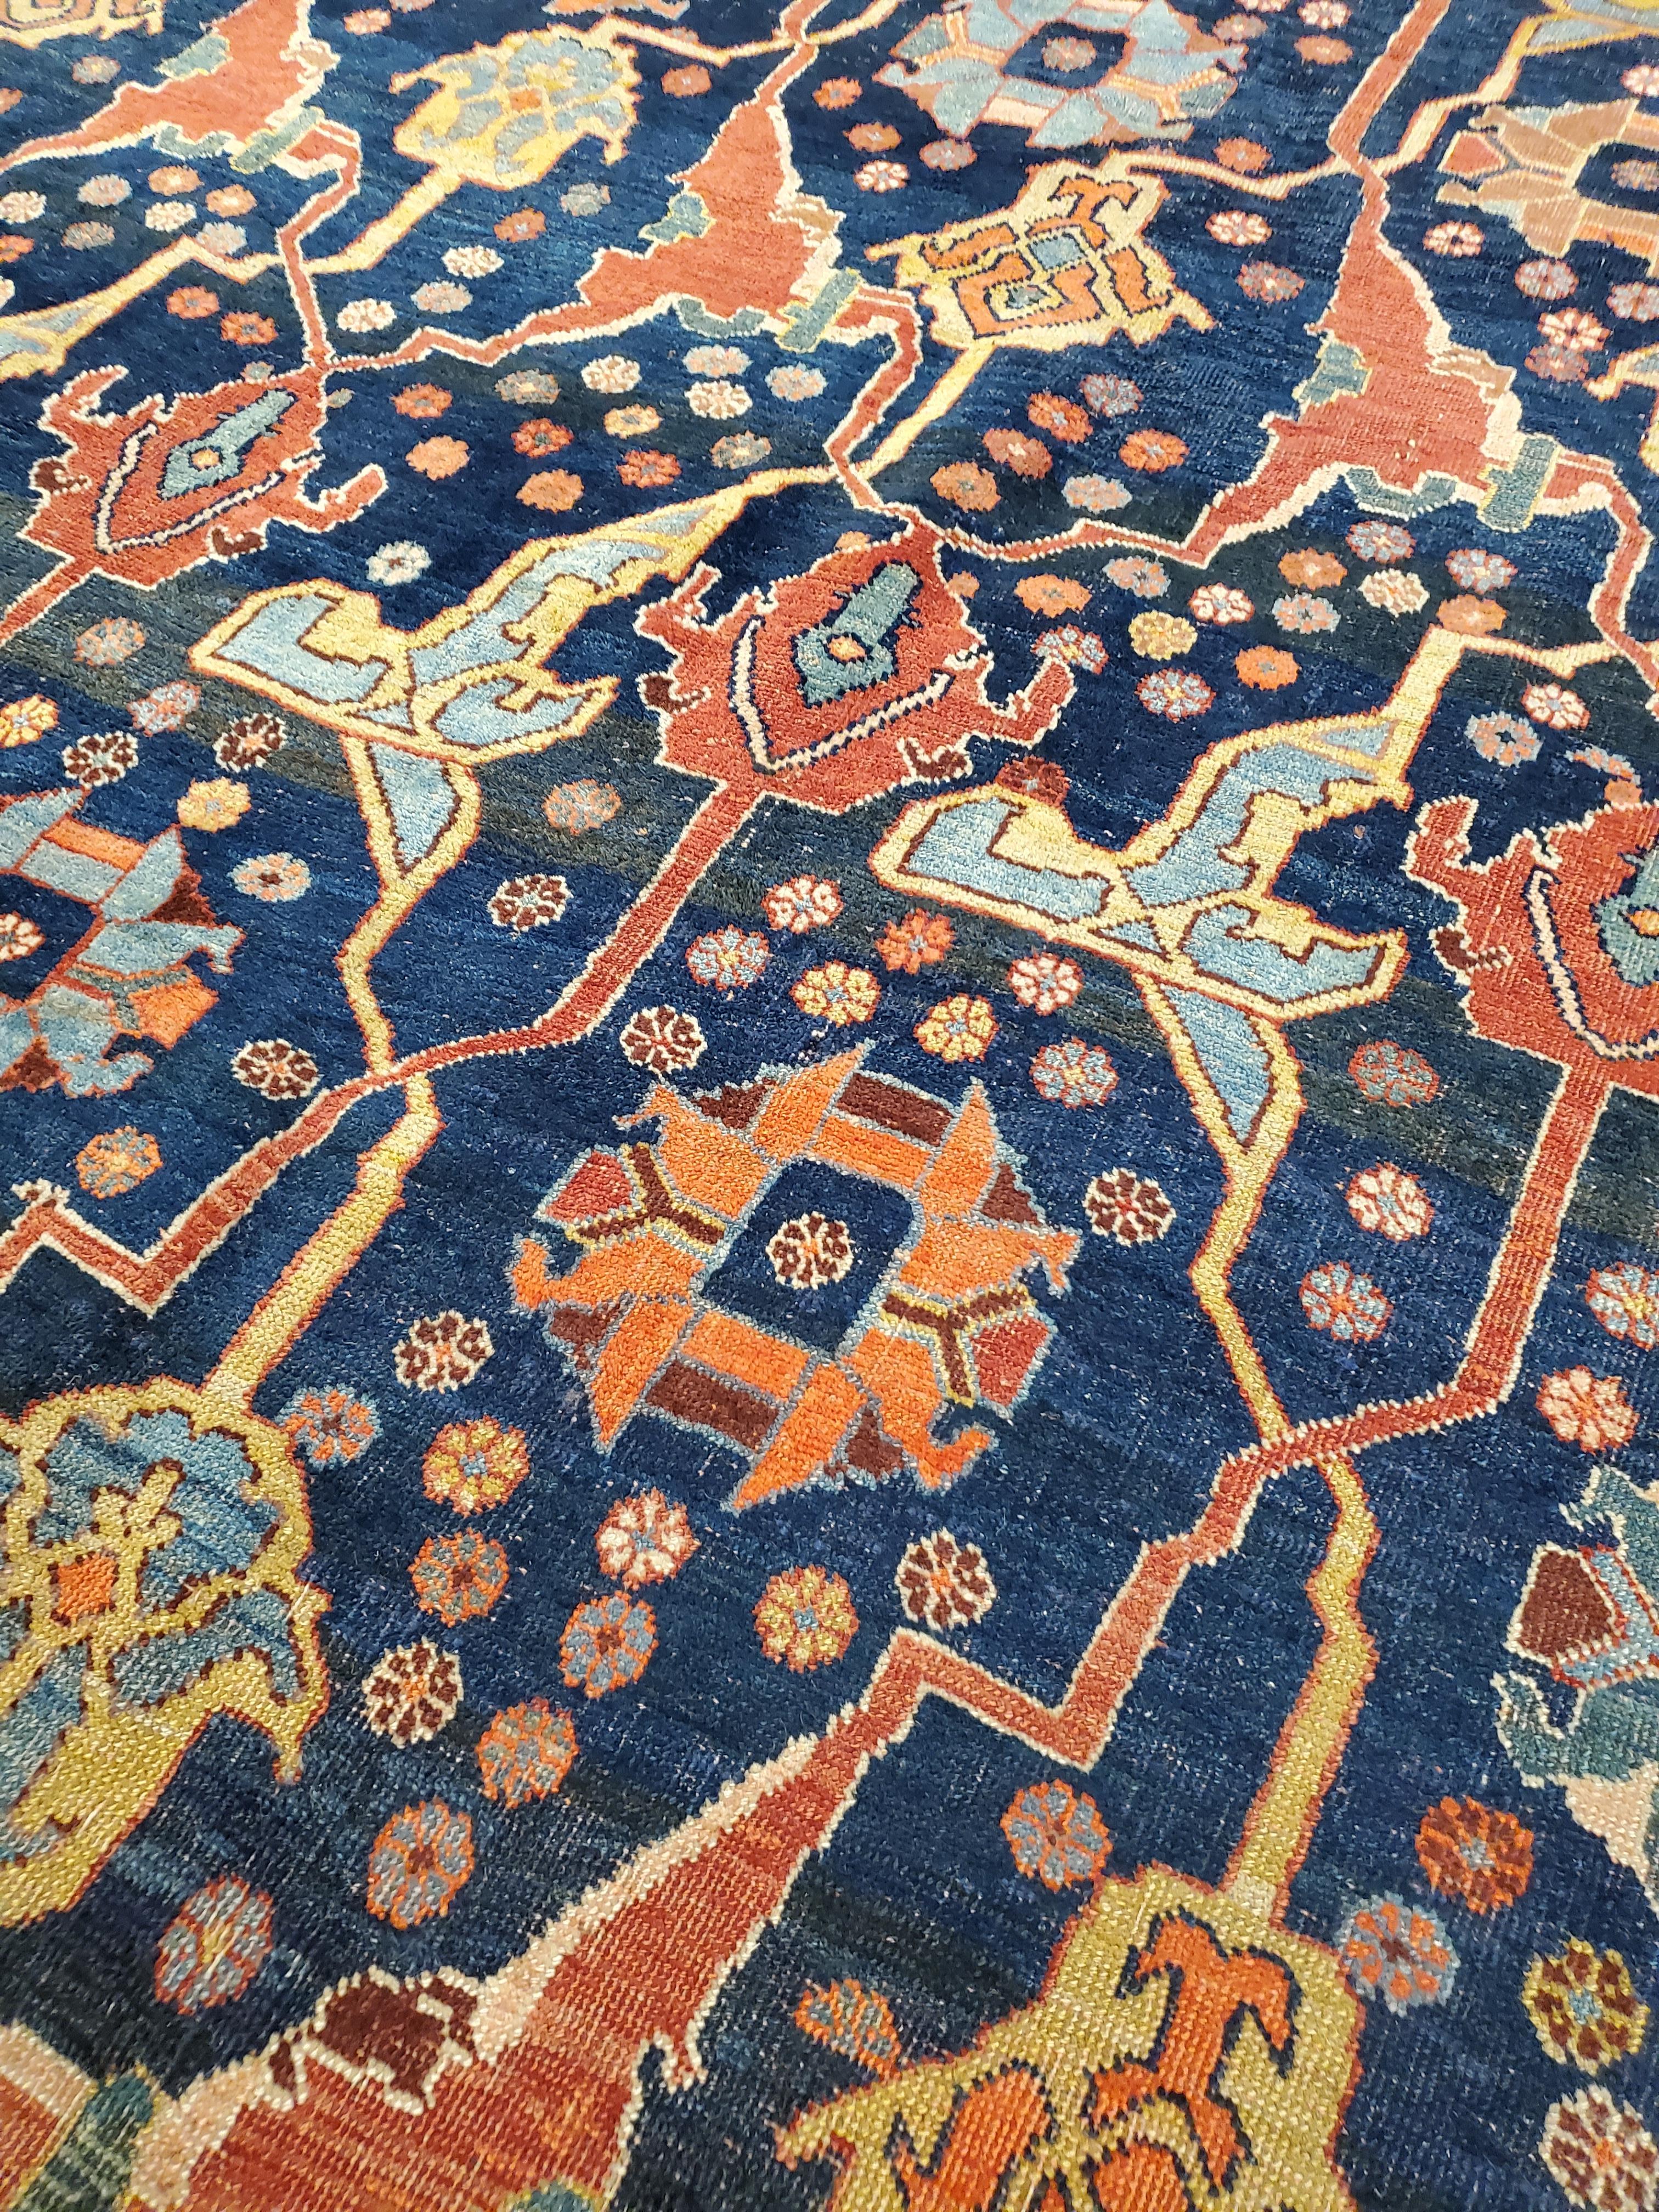 Antique Bijar Carpet Oriental Carpet, Handmade, Navy, Red, Light Blue and Green In Excellent Condition For Sale In Port Washington, NY